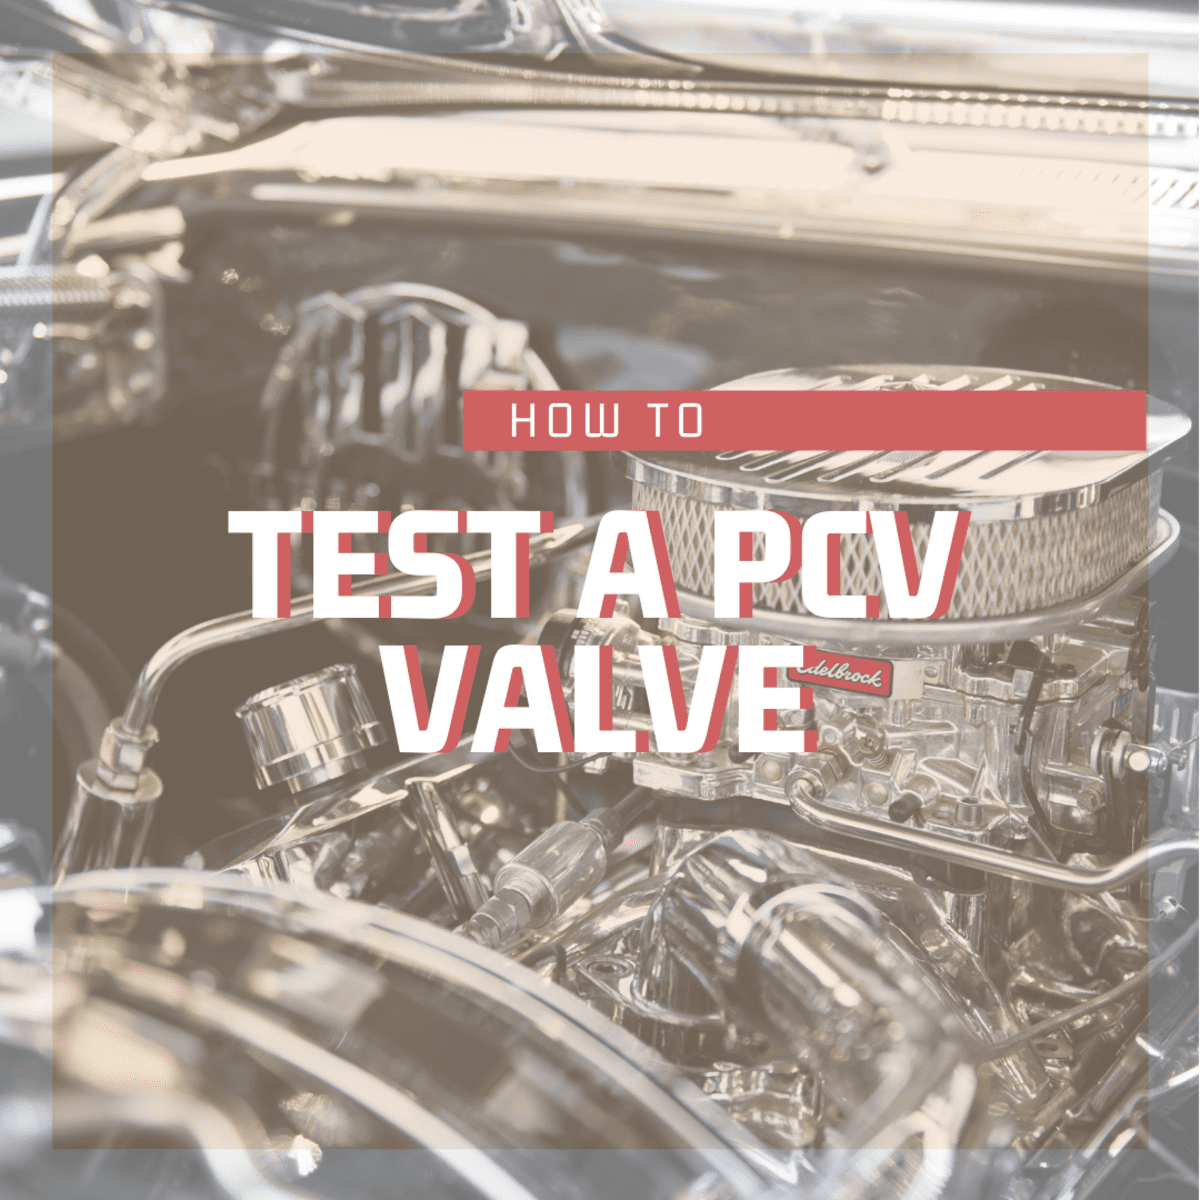 Bad PCV Valve Symptoms and How to Test the PCV Valve Yourself - AxleAddict